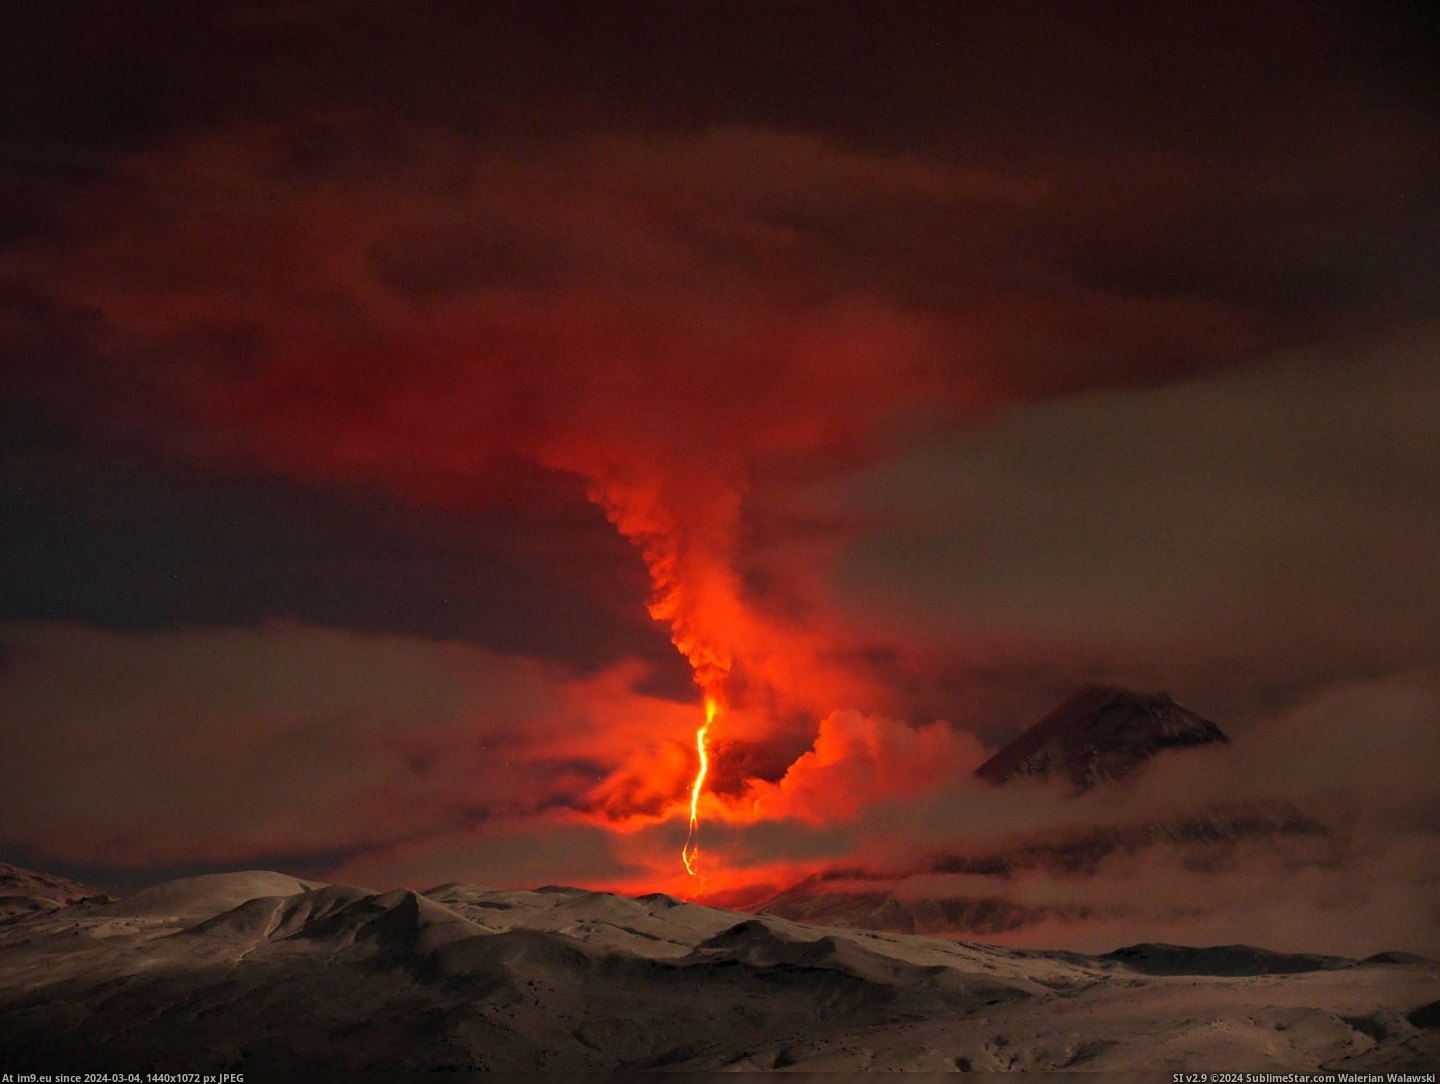 #Scene #Russia #Volcanic #Eruption #Lord #Rings [Pics] Volcanic eruption in Russia looks like a scene from Lord of the Rings Pic. (Image of album My r/PICS favs))